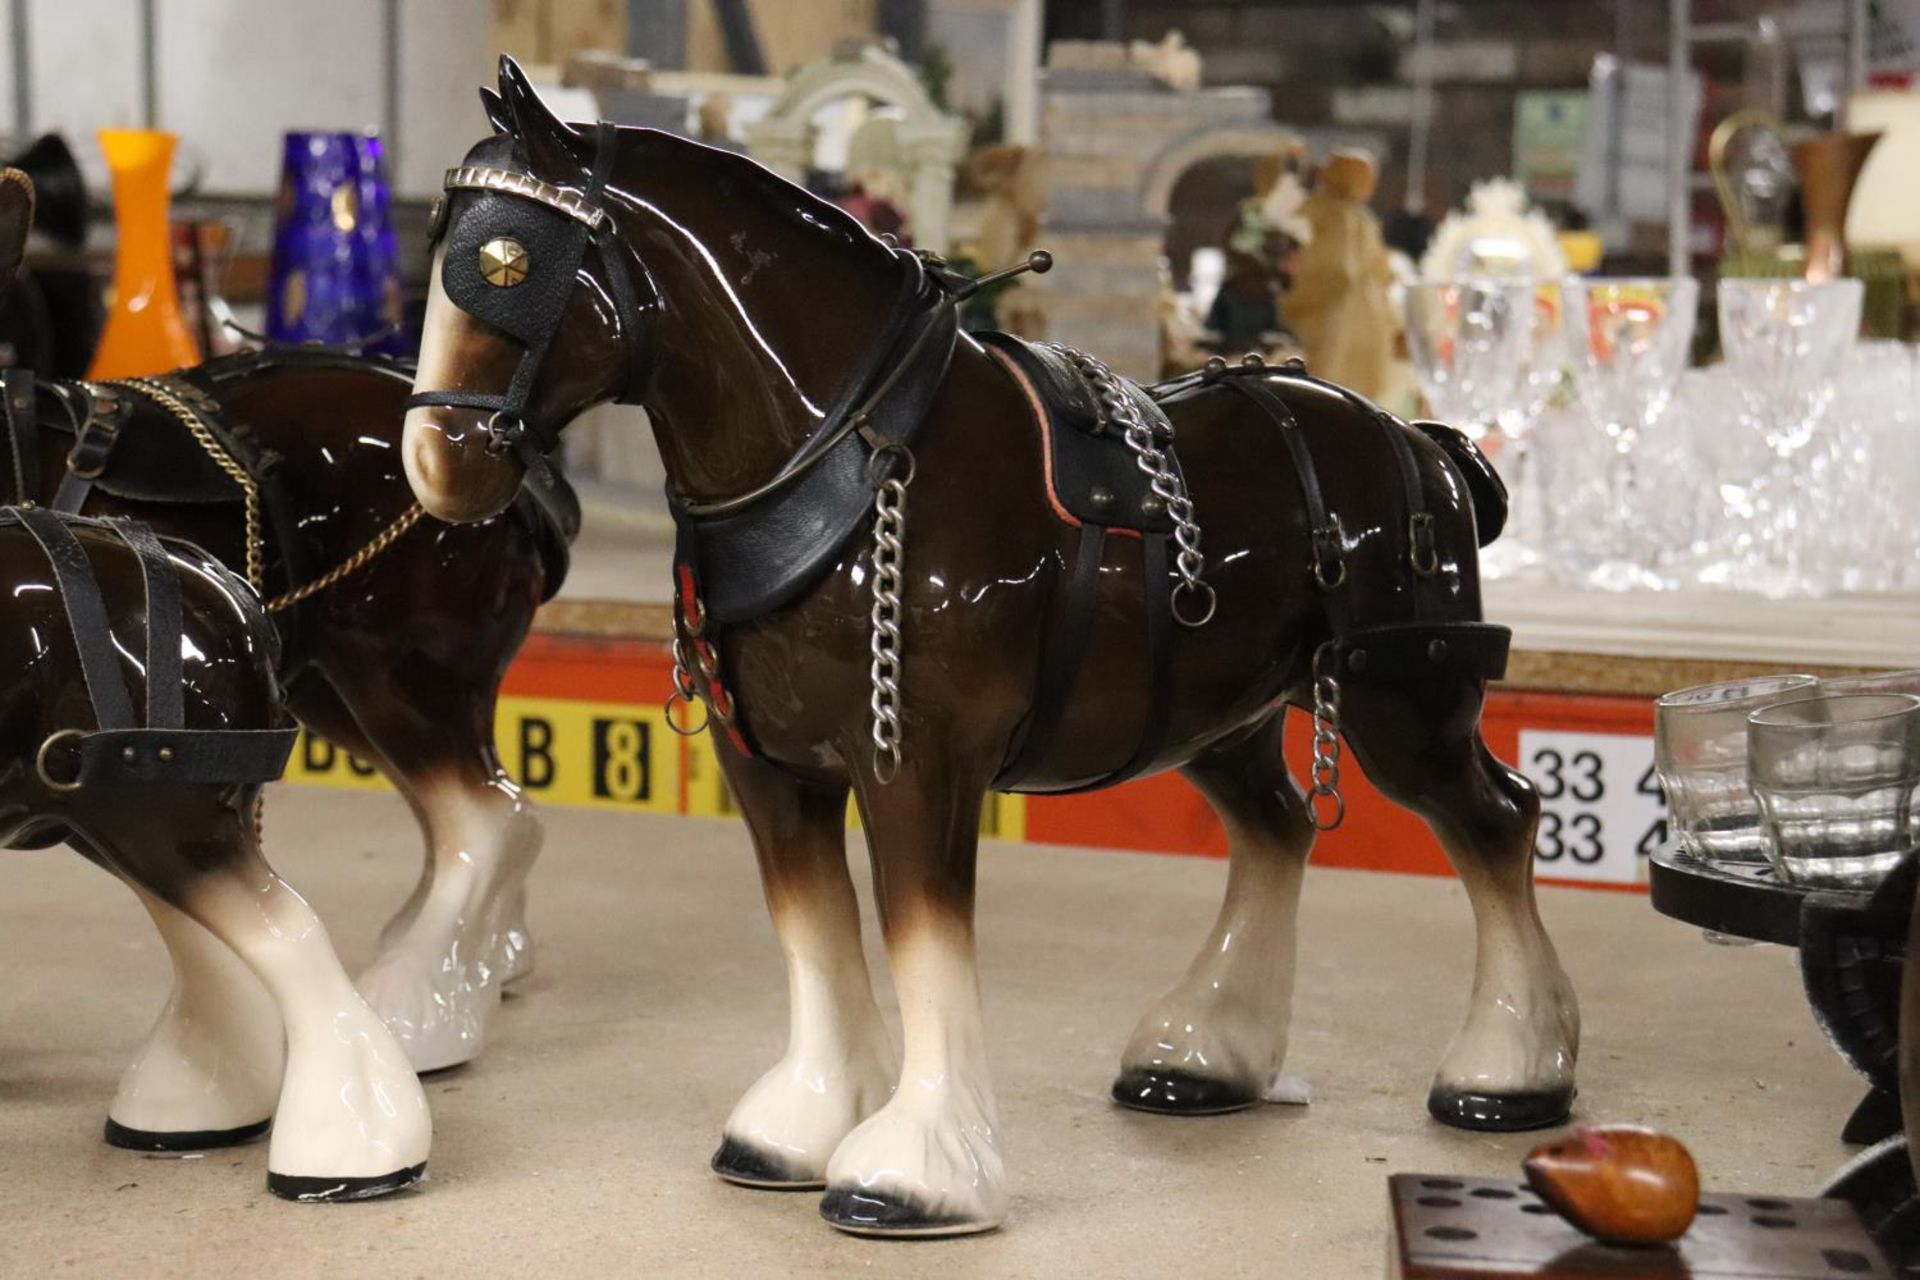 THREE LARGE CERAMIC SHIRE HORSE FIGURES WITH HARNESSES - Image 5 of 6